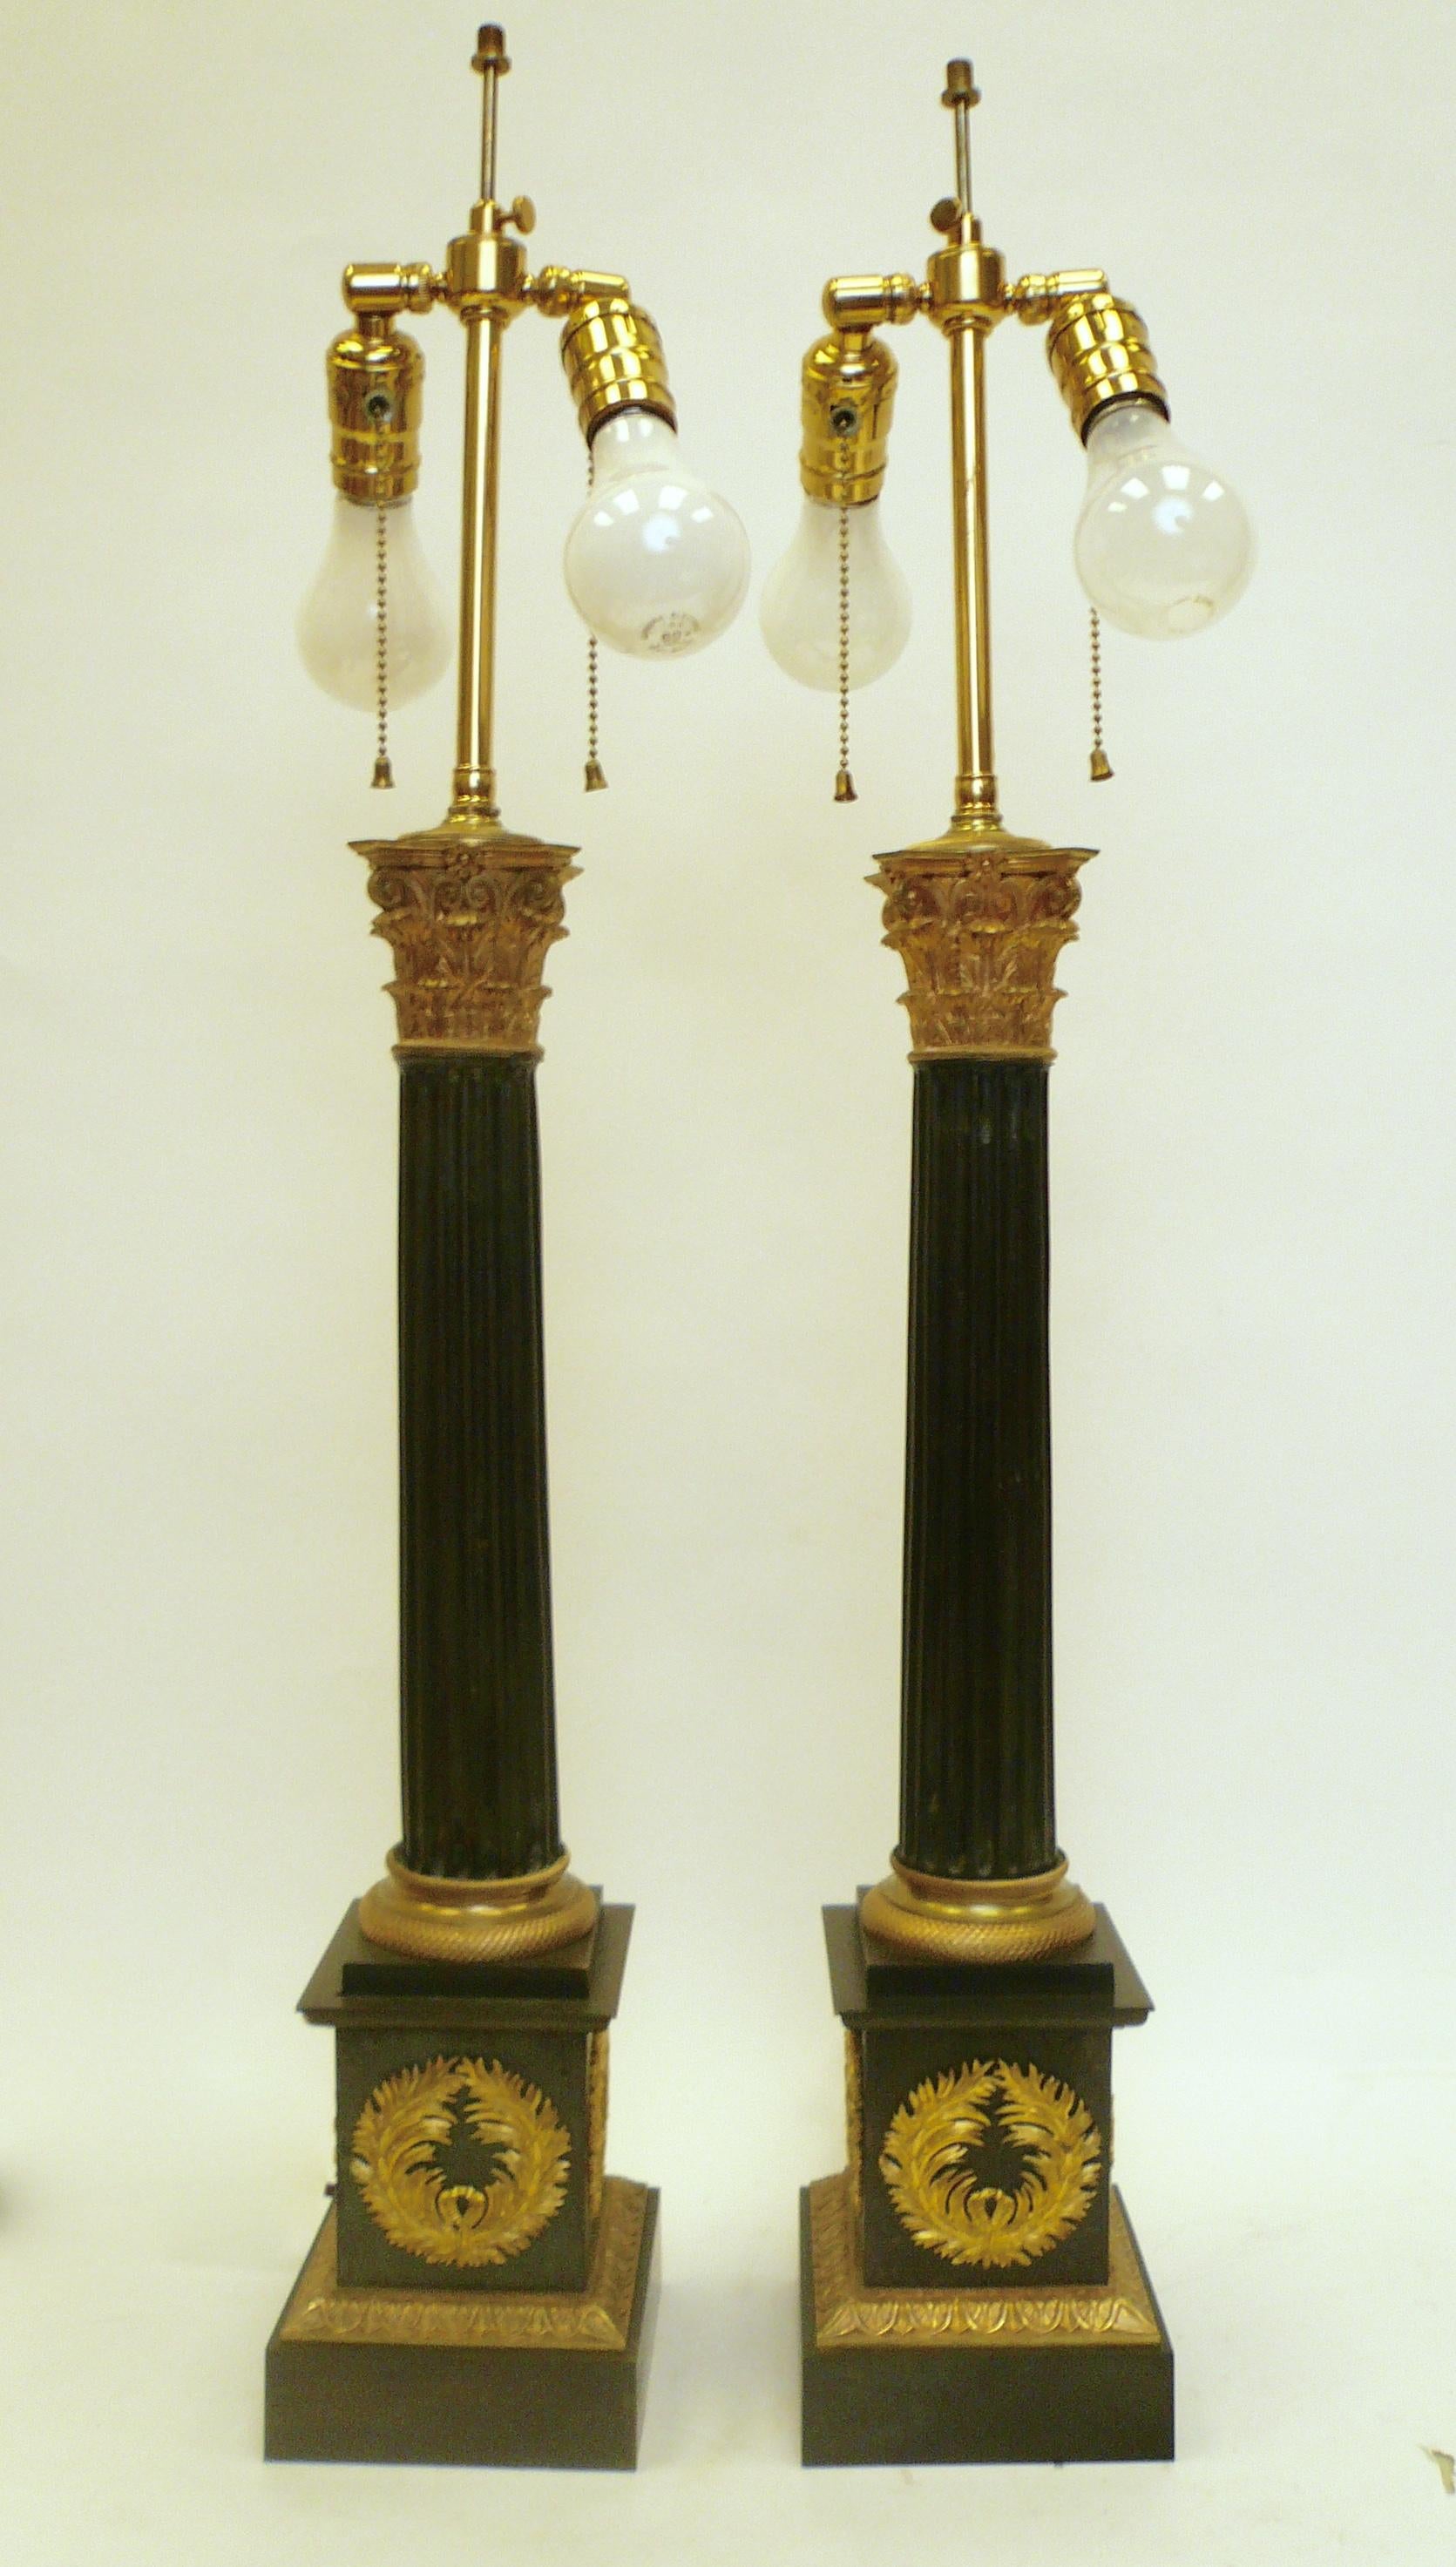 Originally oil lamps, this pair of bronze columnar form lamps feature gilt bronze classical wreaths, and Corinthian capitals.